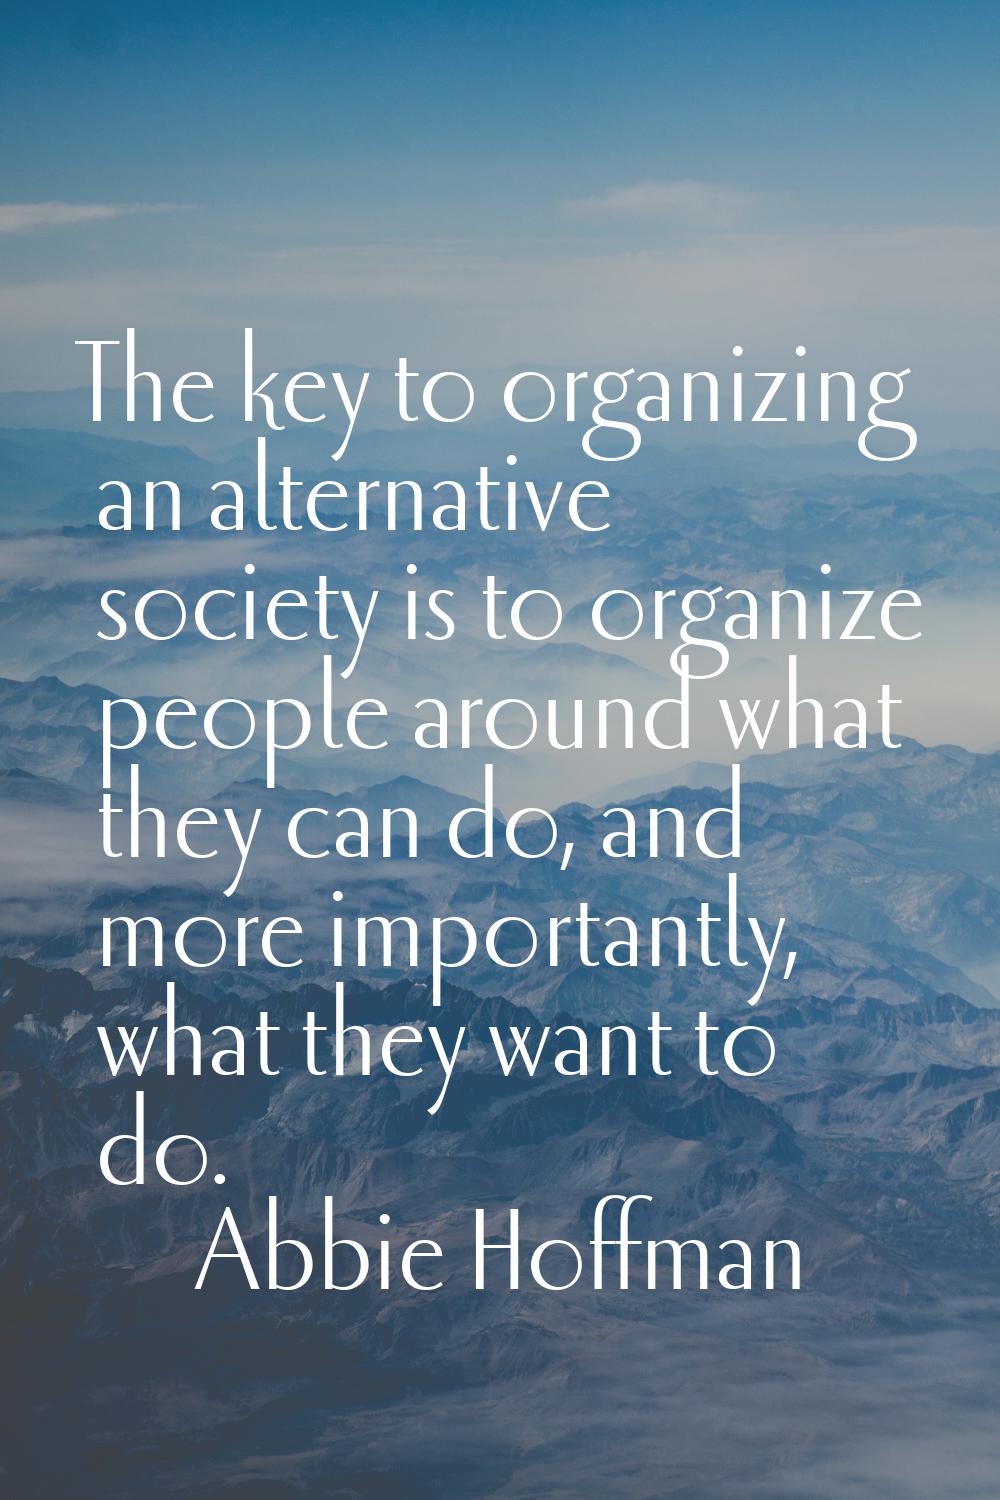 The key to organizing an alternative society is to organize people around what they can do, and mor